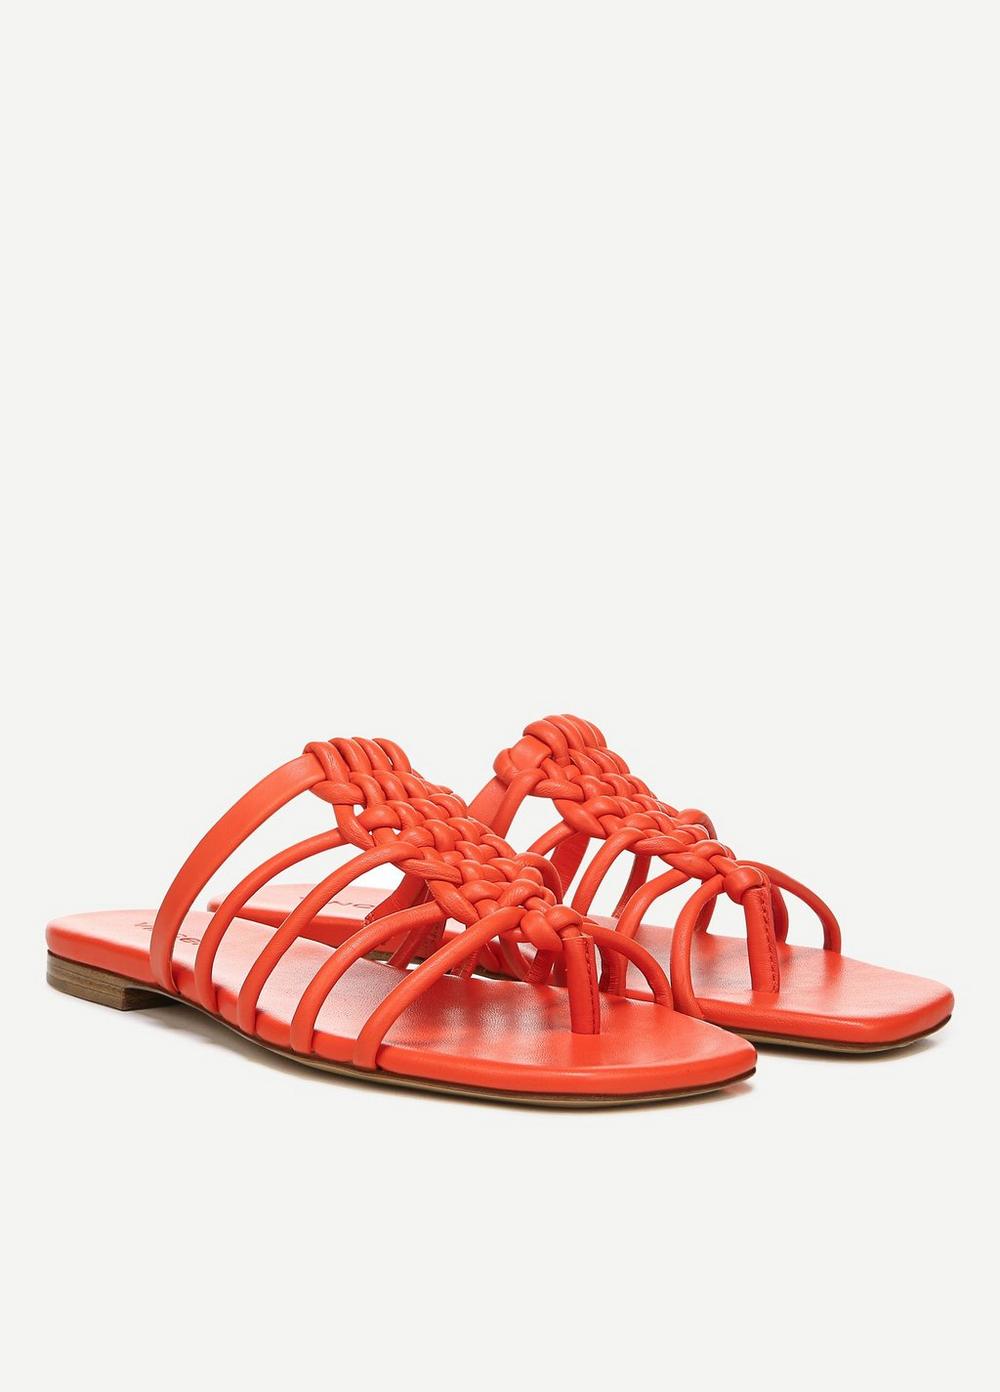 Dae Knotted Leather Flat Sandal